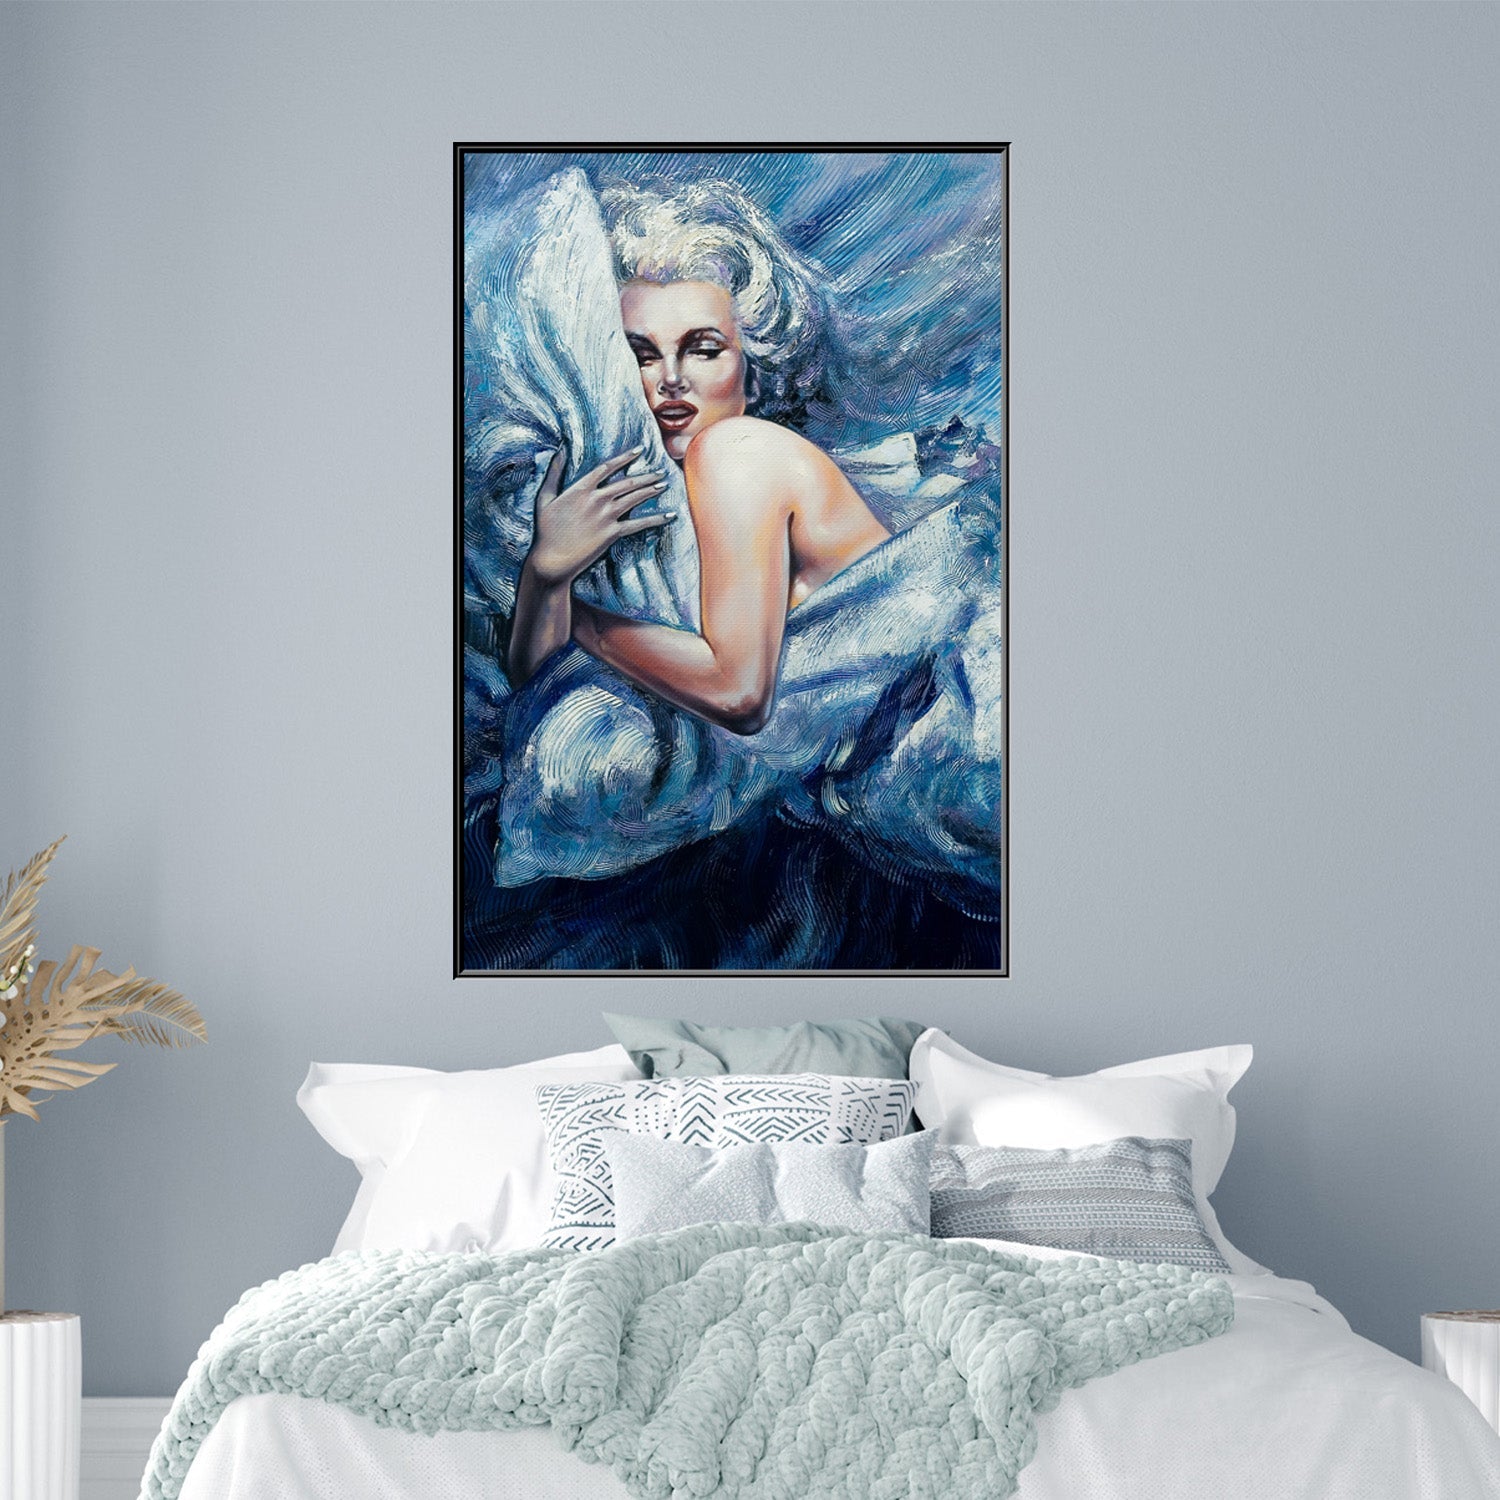 https://cdn.shopify.com/s/files/1/0387/9986/8044/products/WomaninBedFloatingFrame-1.jpg